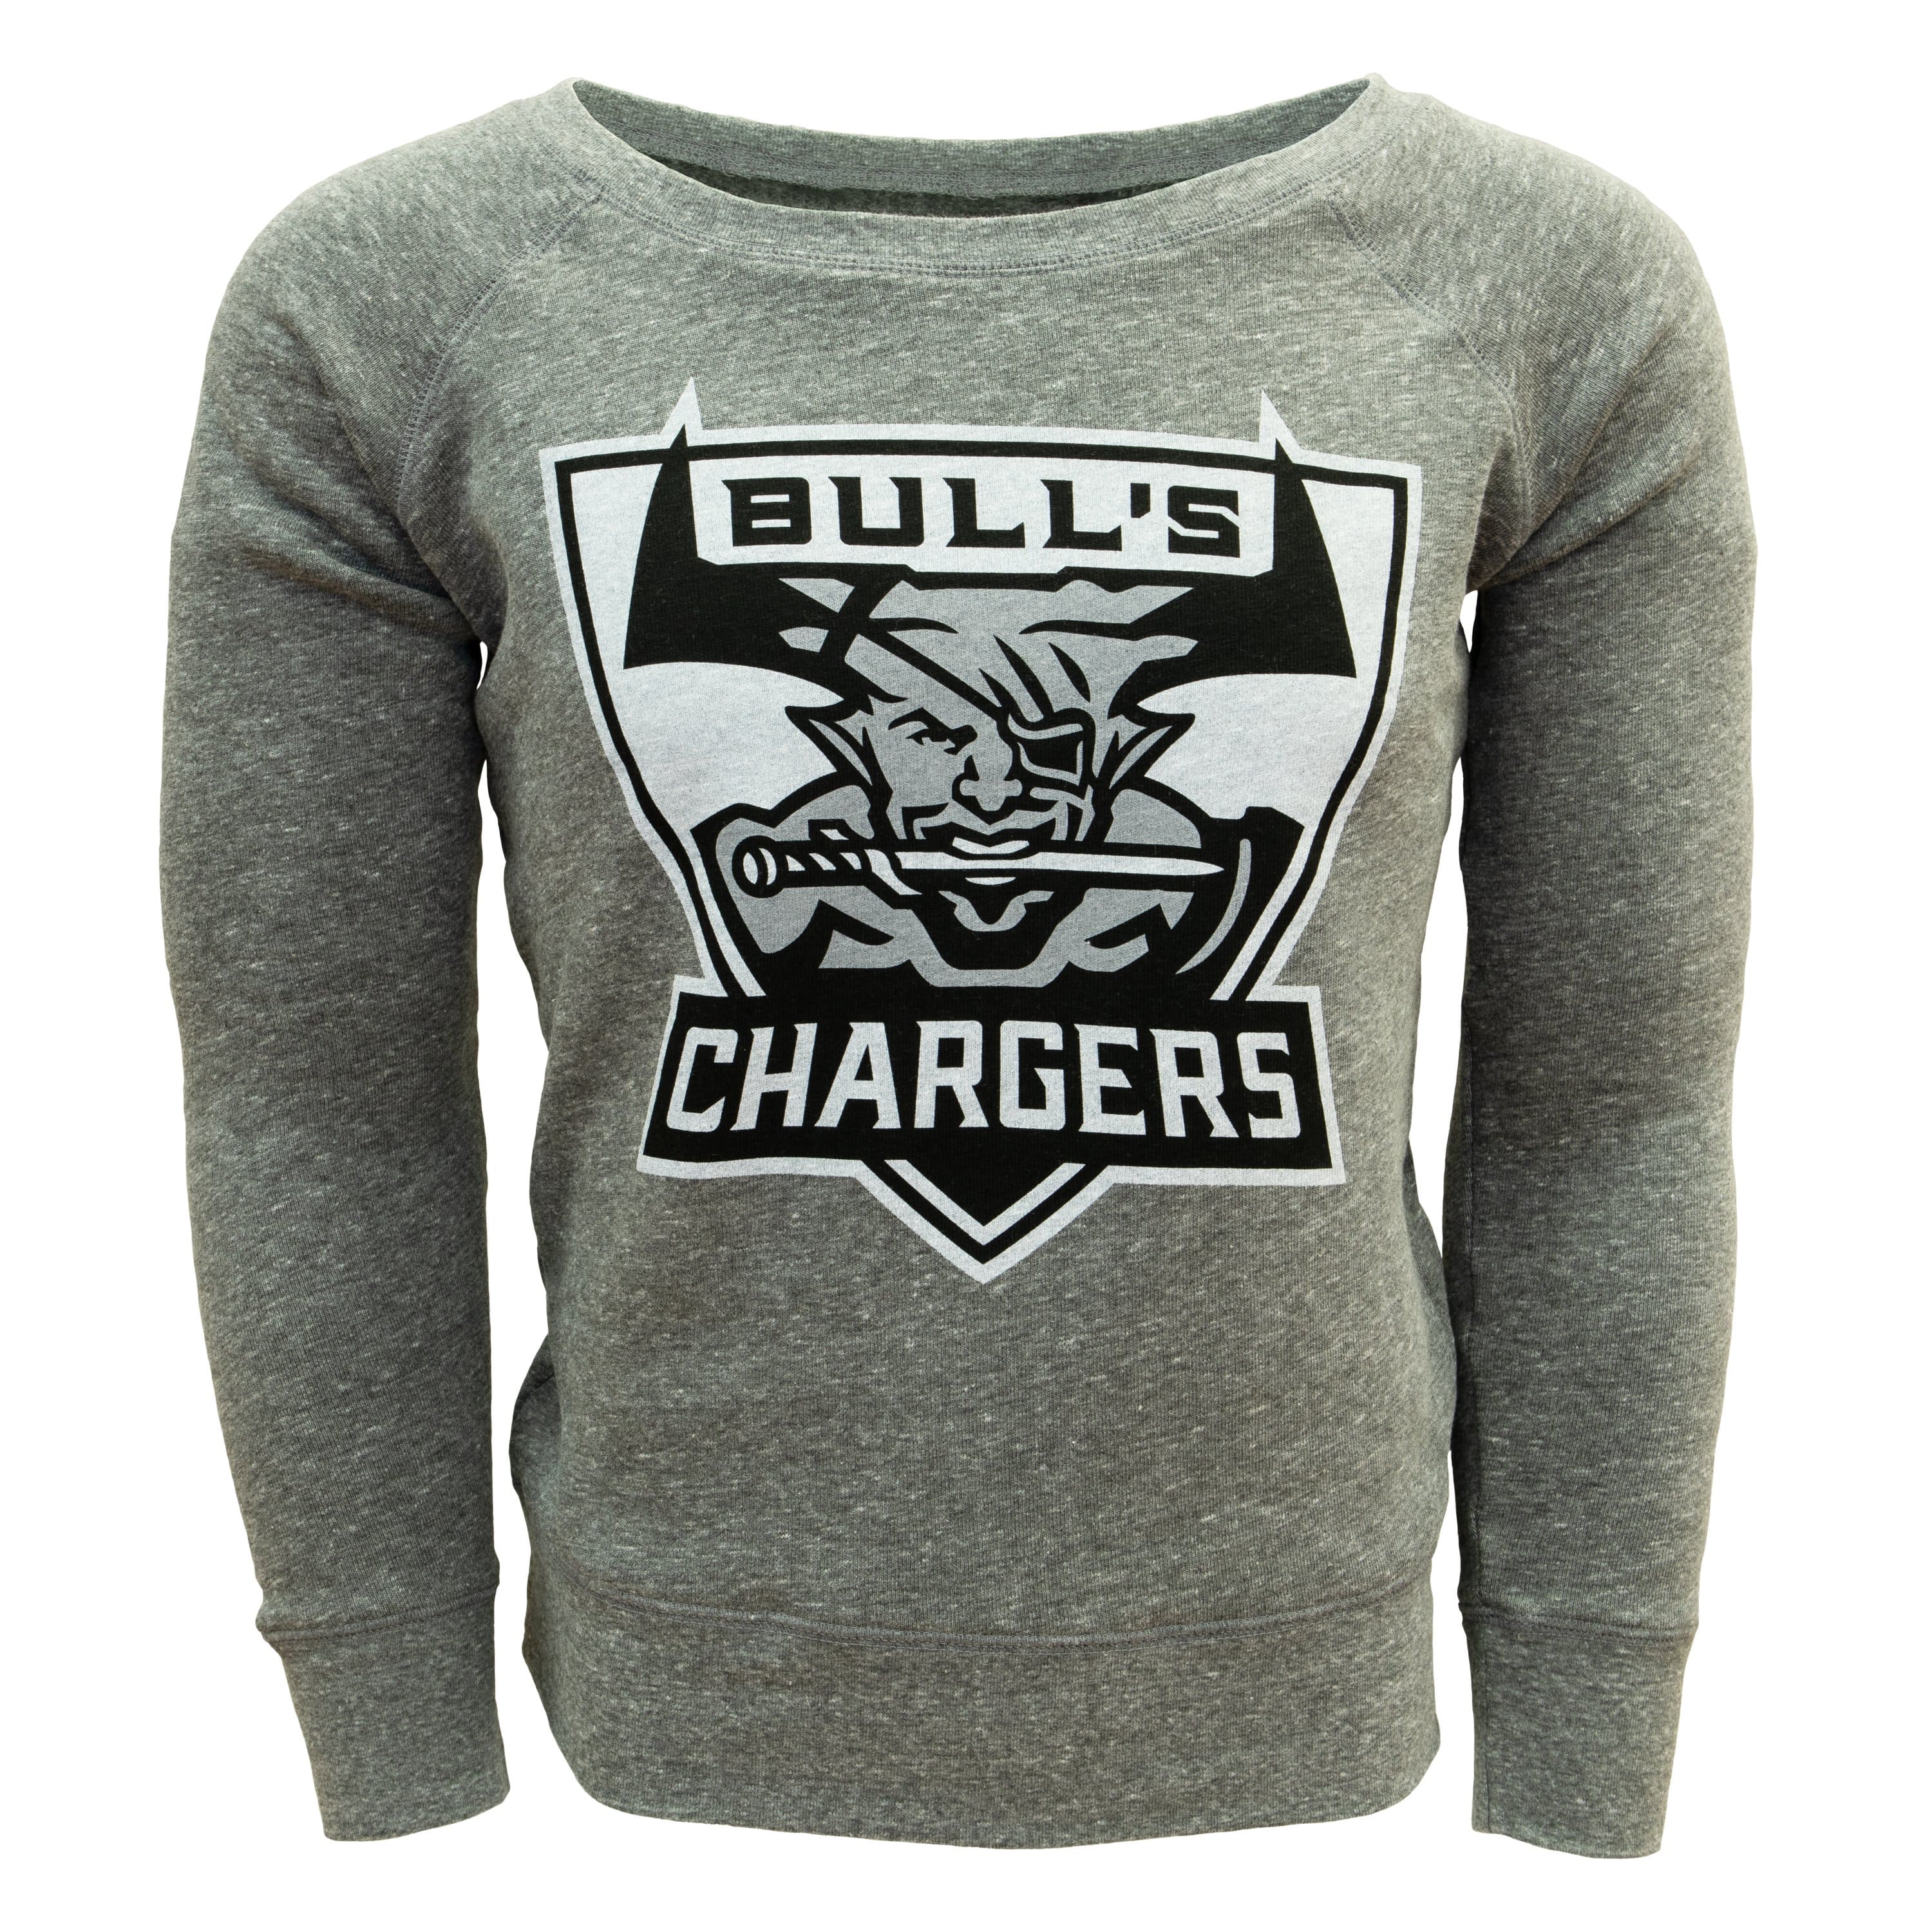 Dragon Age - Bull's Chargers Women's Wide Neck Crewneck